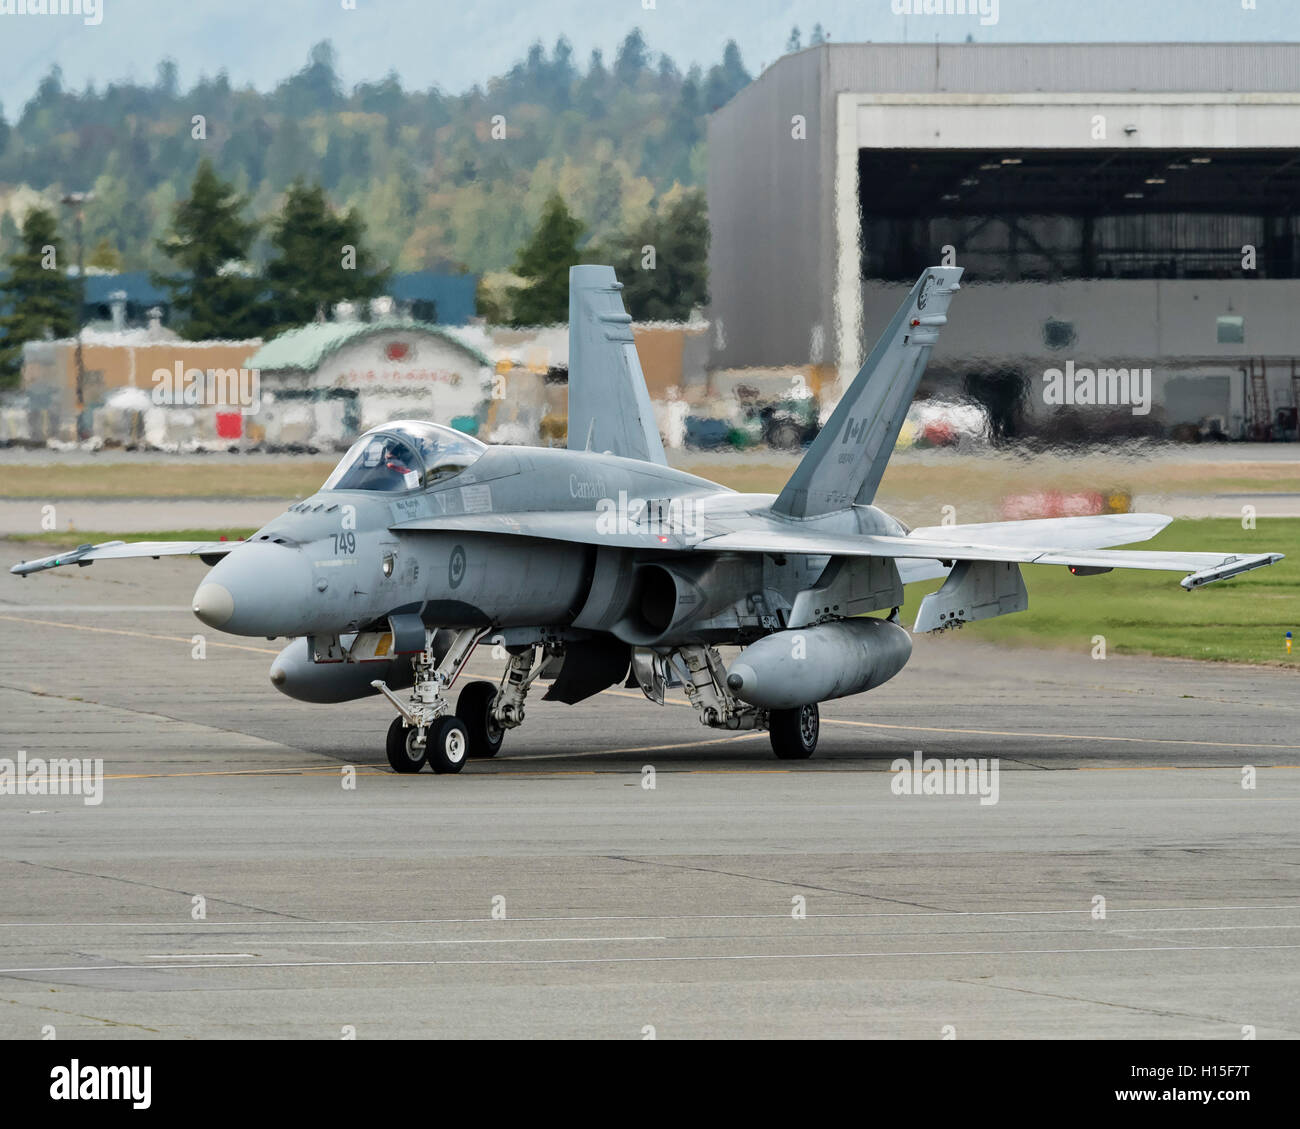 CF-18A Hornet fighter jet of the Royal Canadian Air Force taxies along the tarmac at Vancouver International Airport, Canada Stock Photo